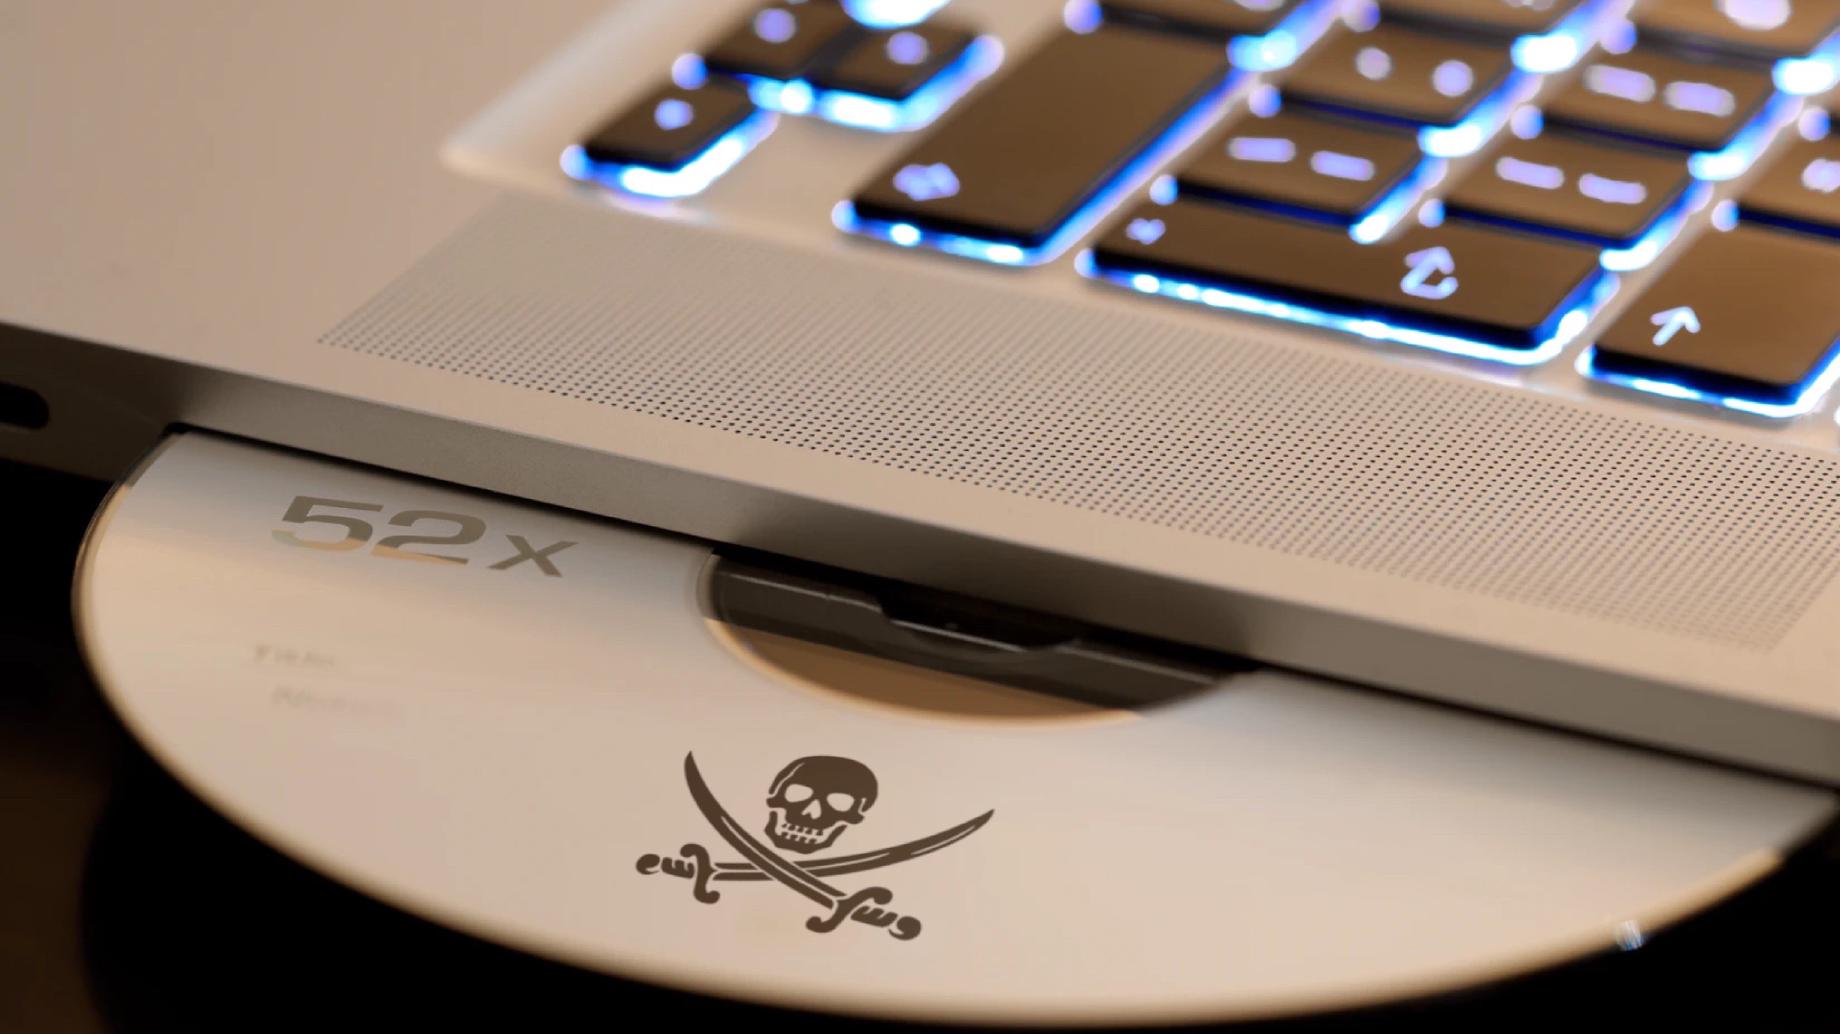 The issue of piracy